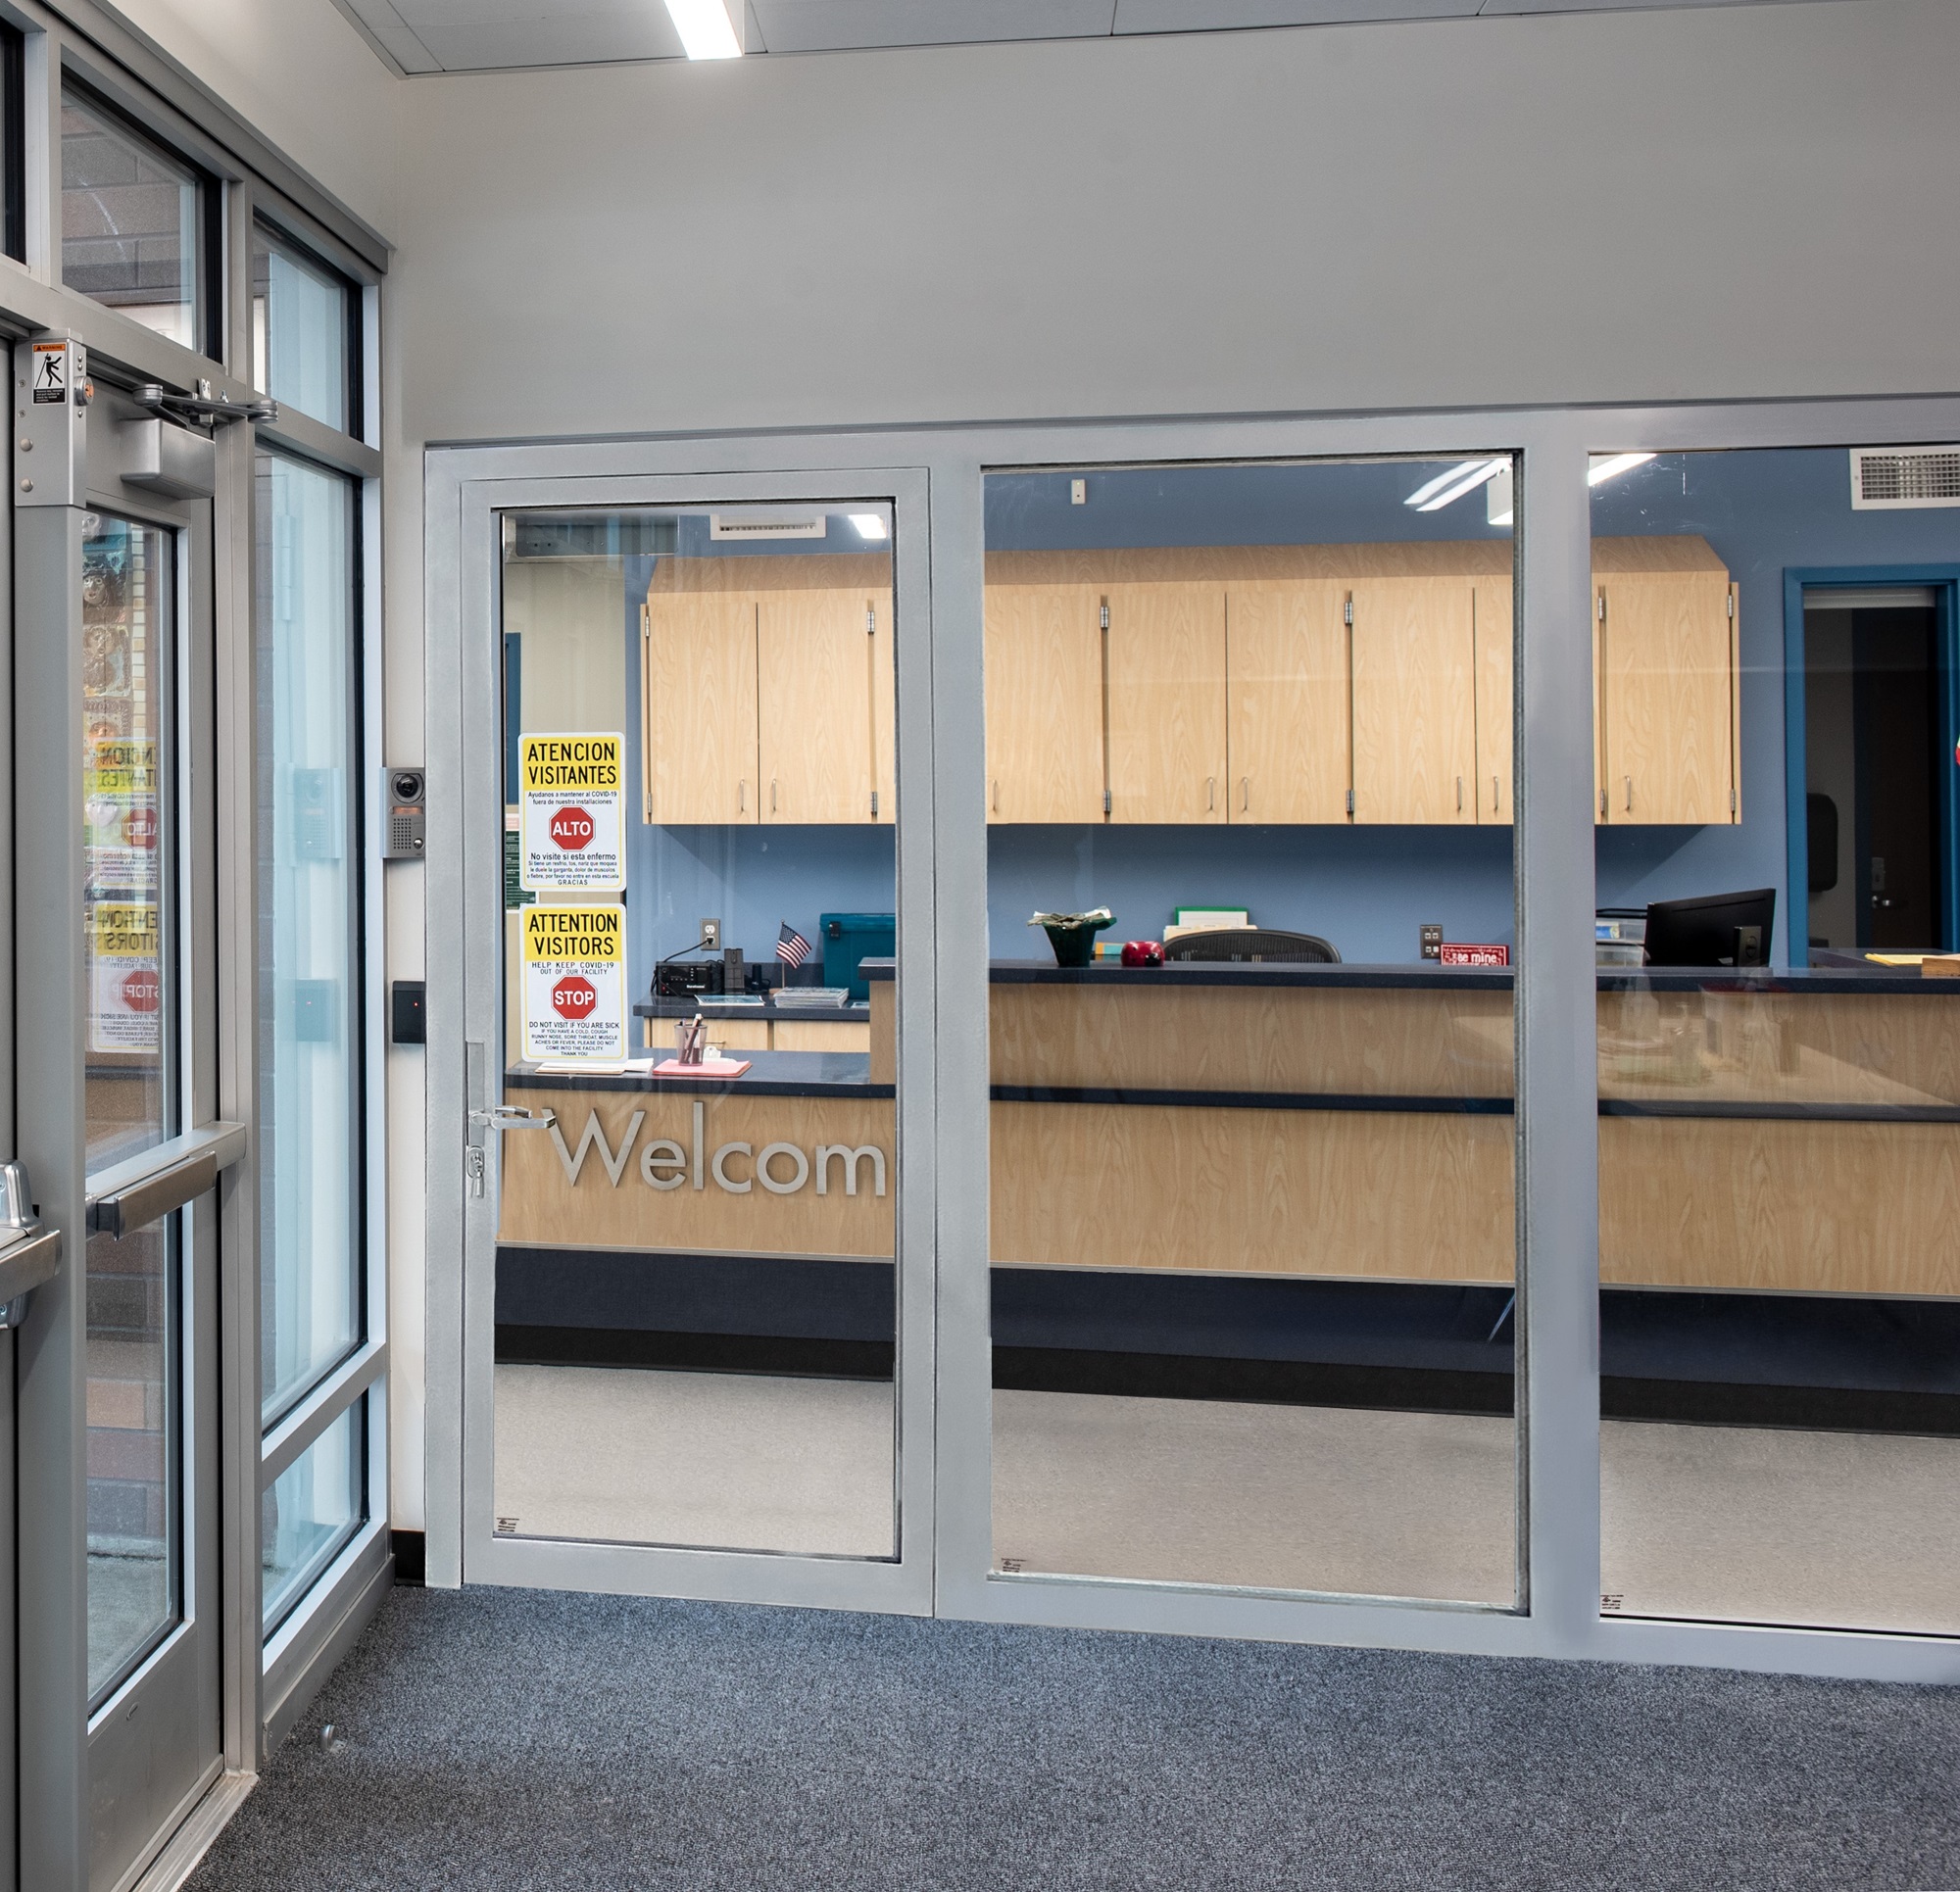 Security-rated glazing supports safer school design